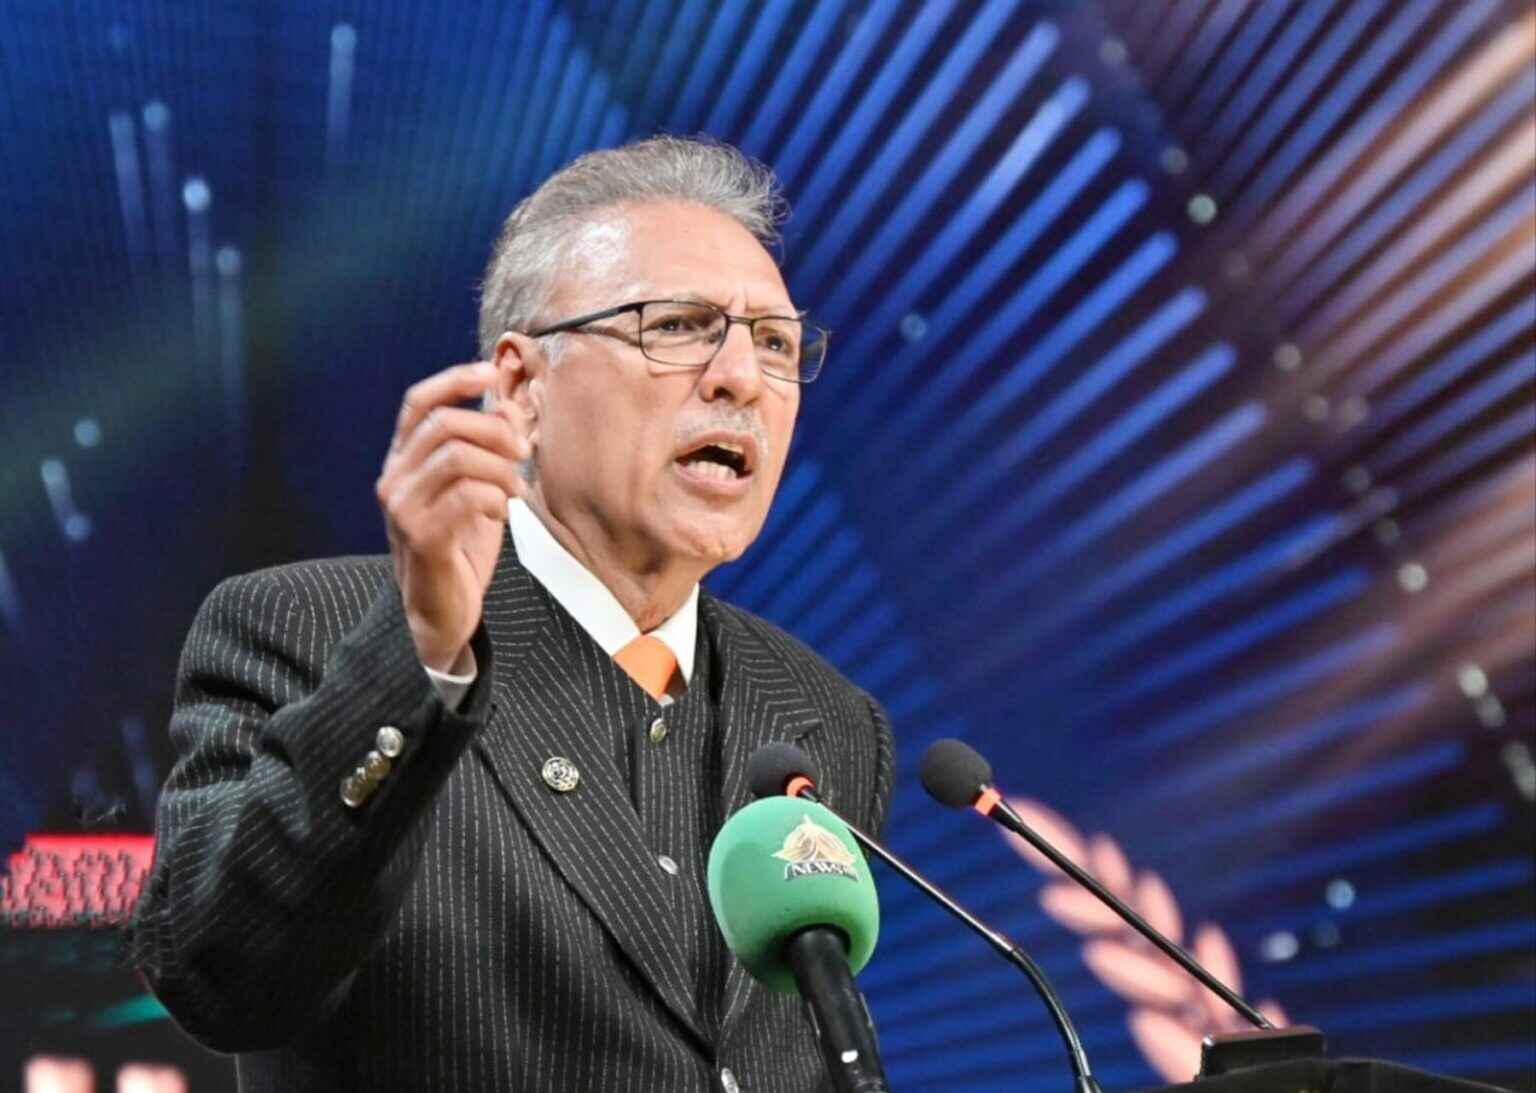 Healthcare and education are vital for women’s empowerment, affirms President Alvi